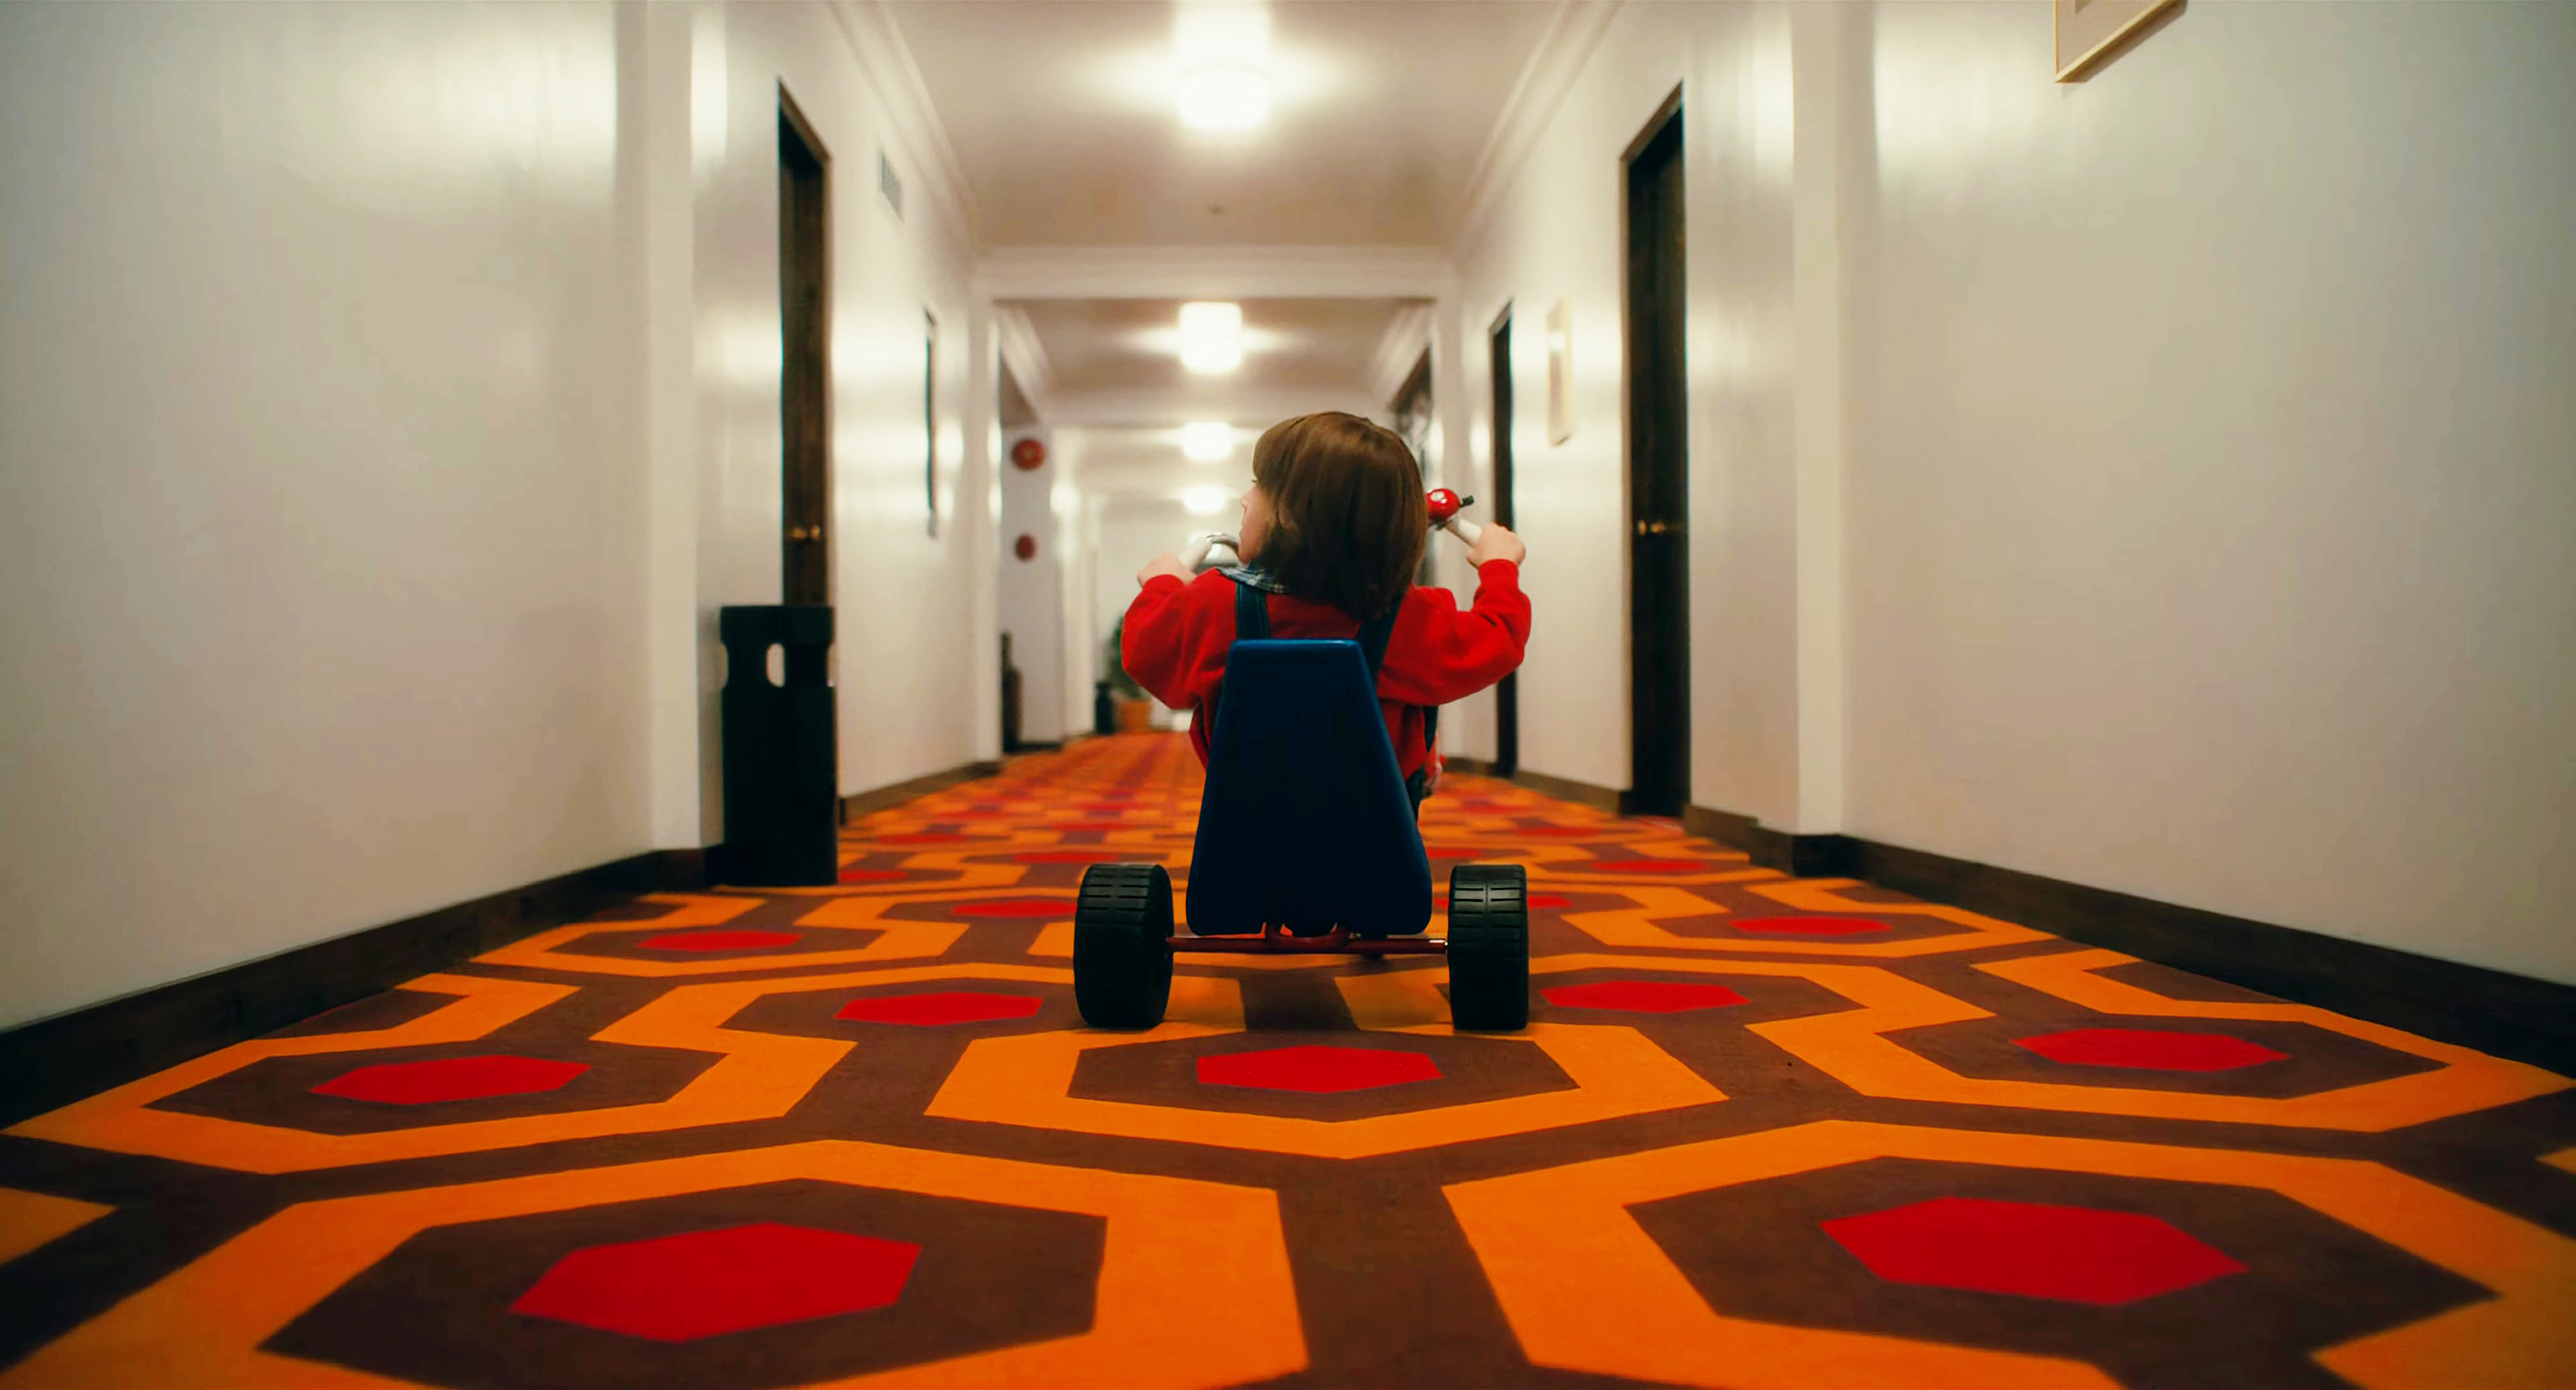 80 The Shining  Android iPhone Desktop HD Backgrounds  Wallpapers  1080p 4k